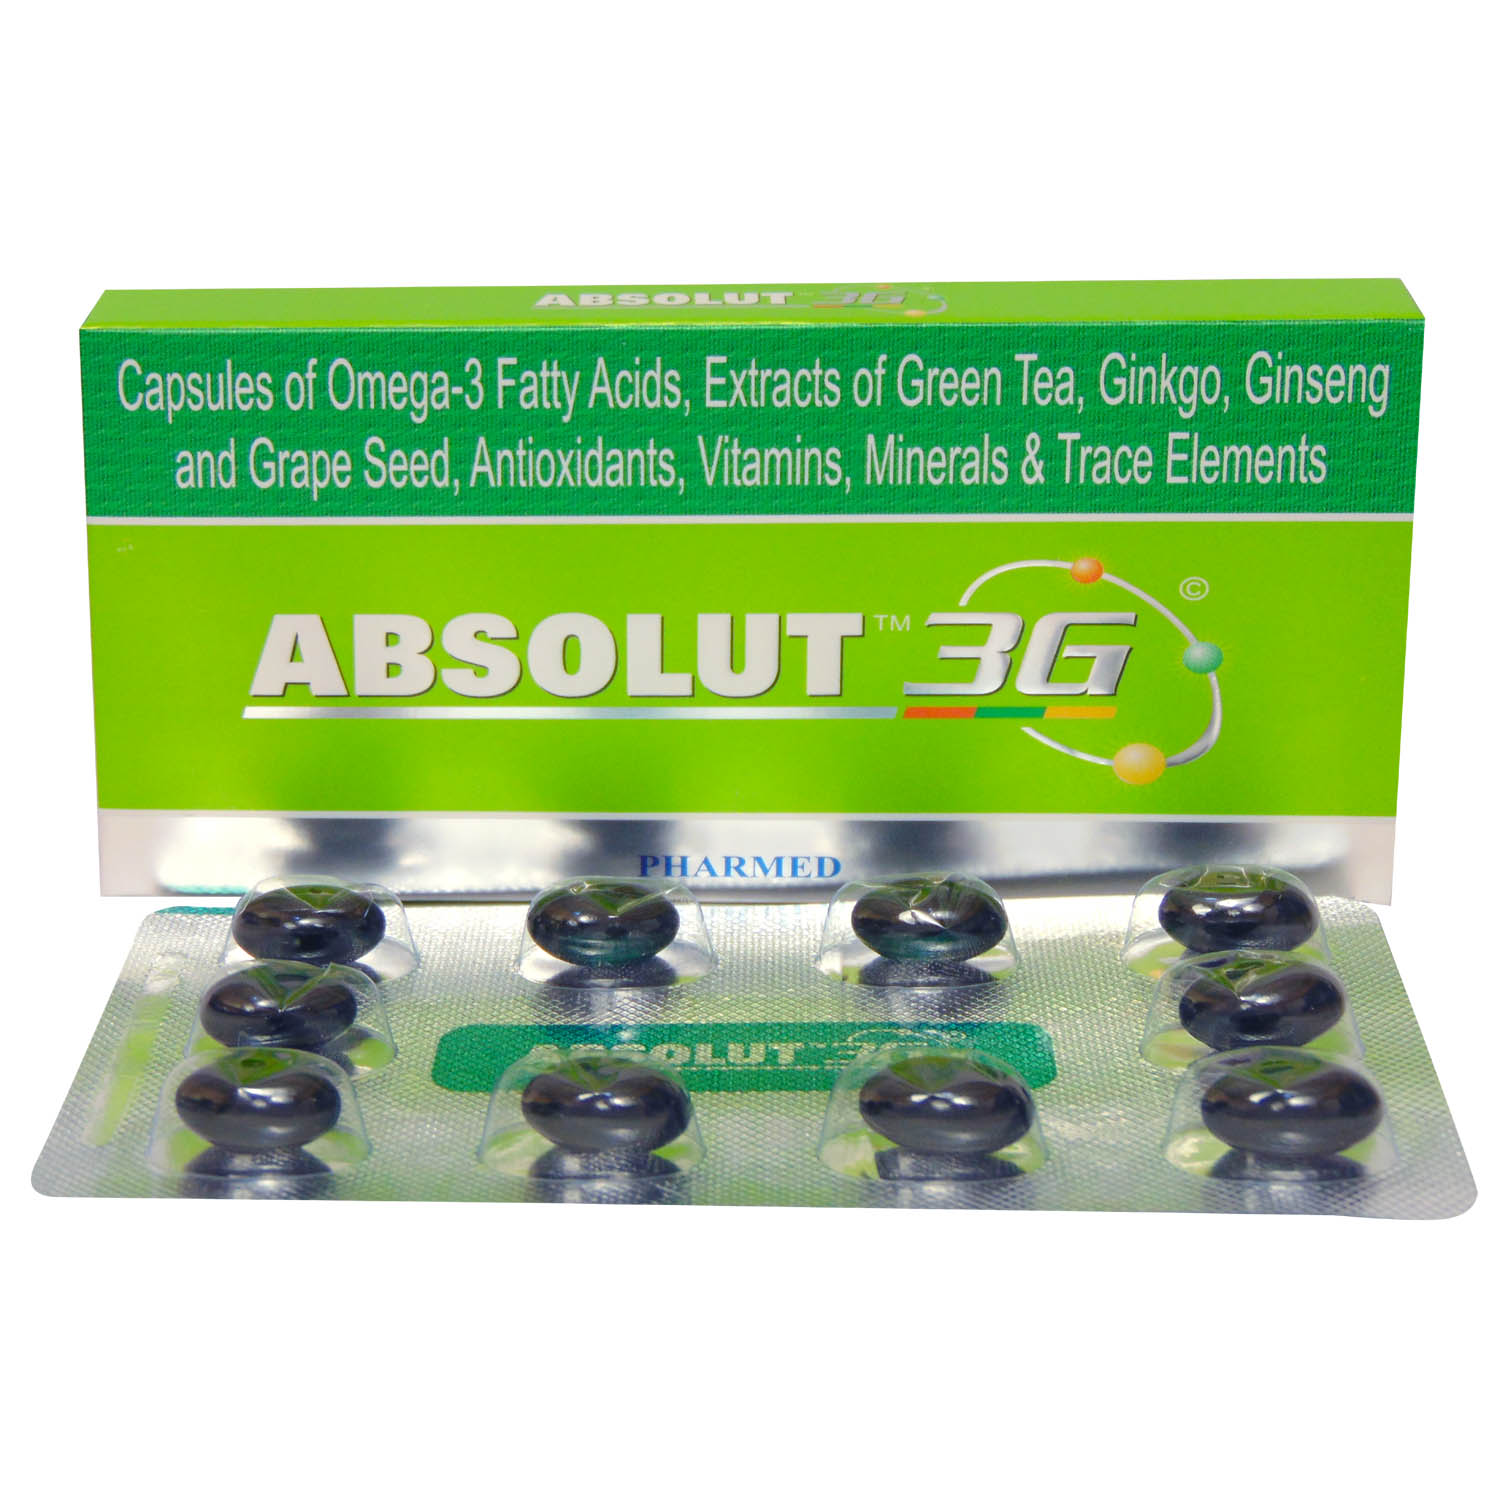 Positrarx Your Local Online Pharmacy Absolut 3g Capsule